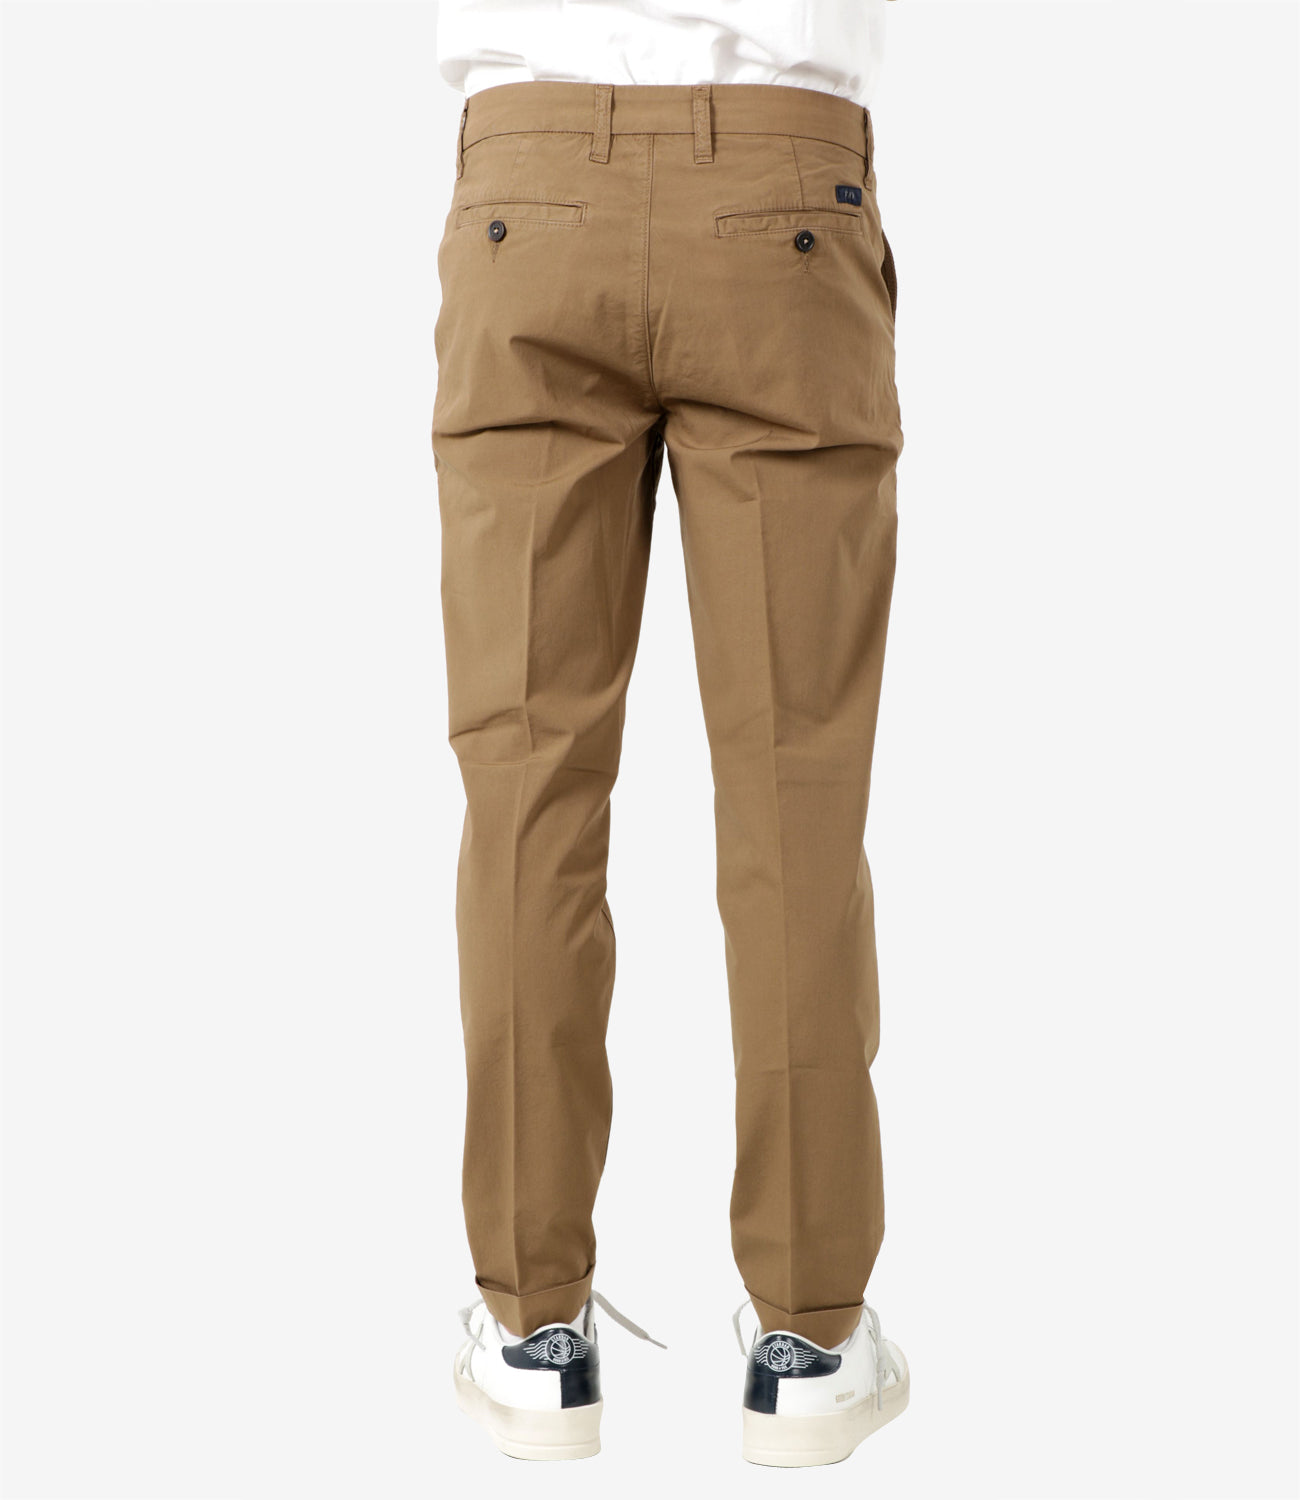 Fay | Camel Trousers